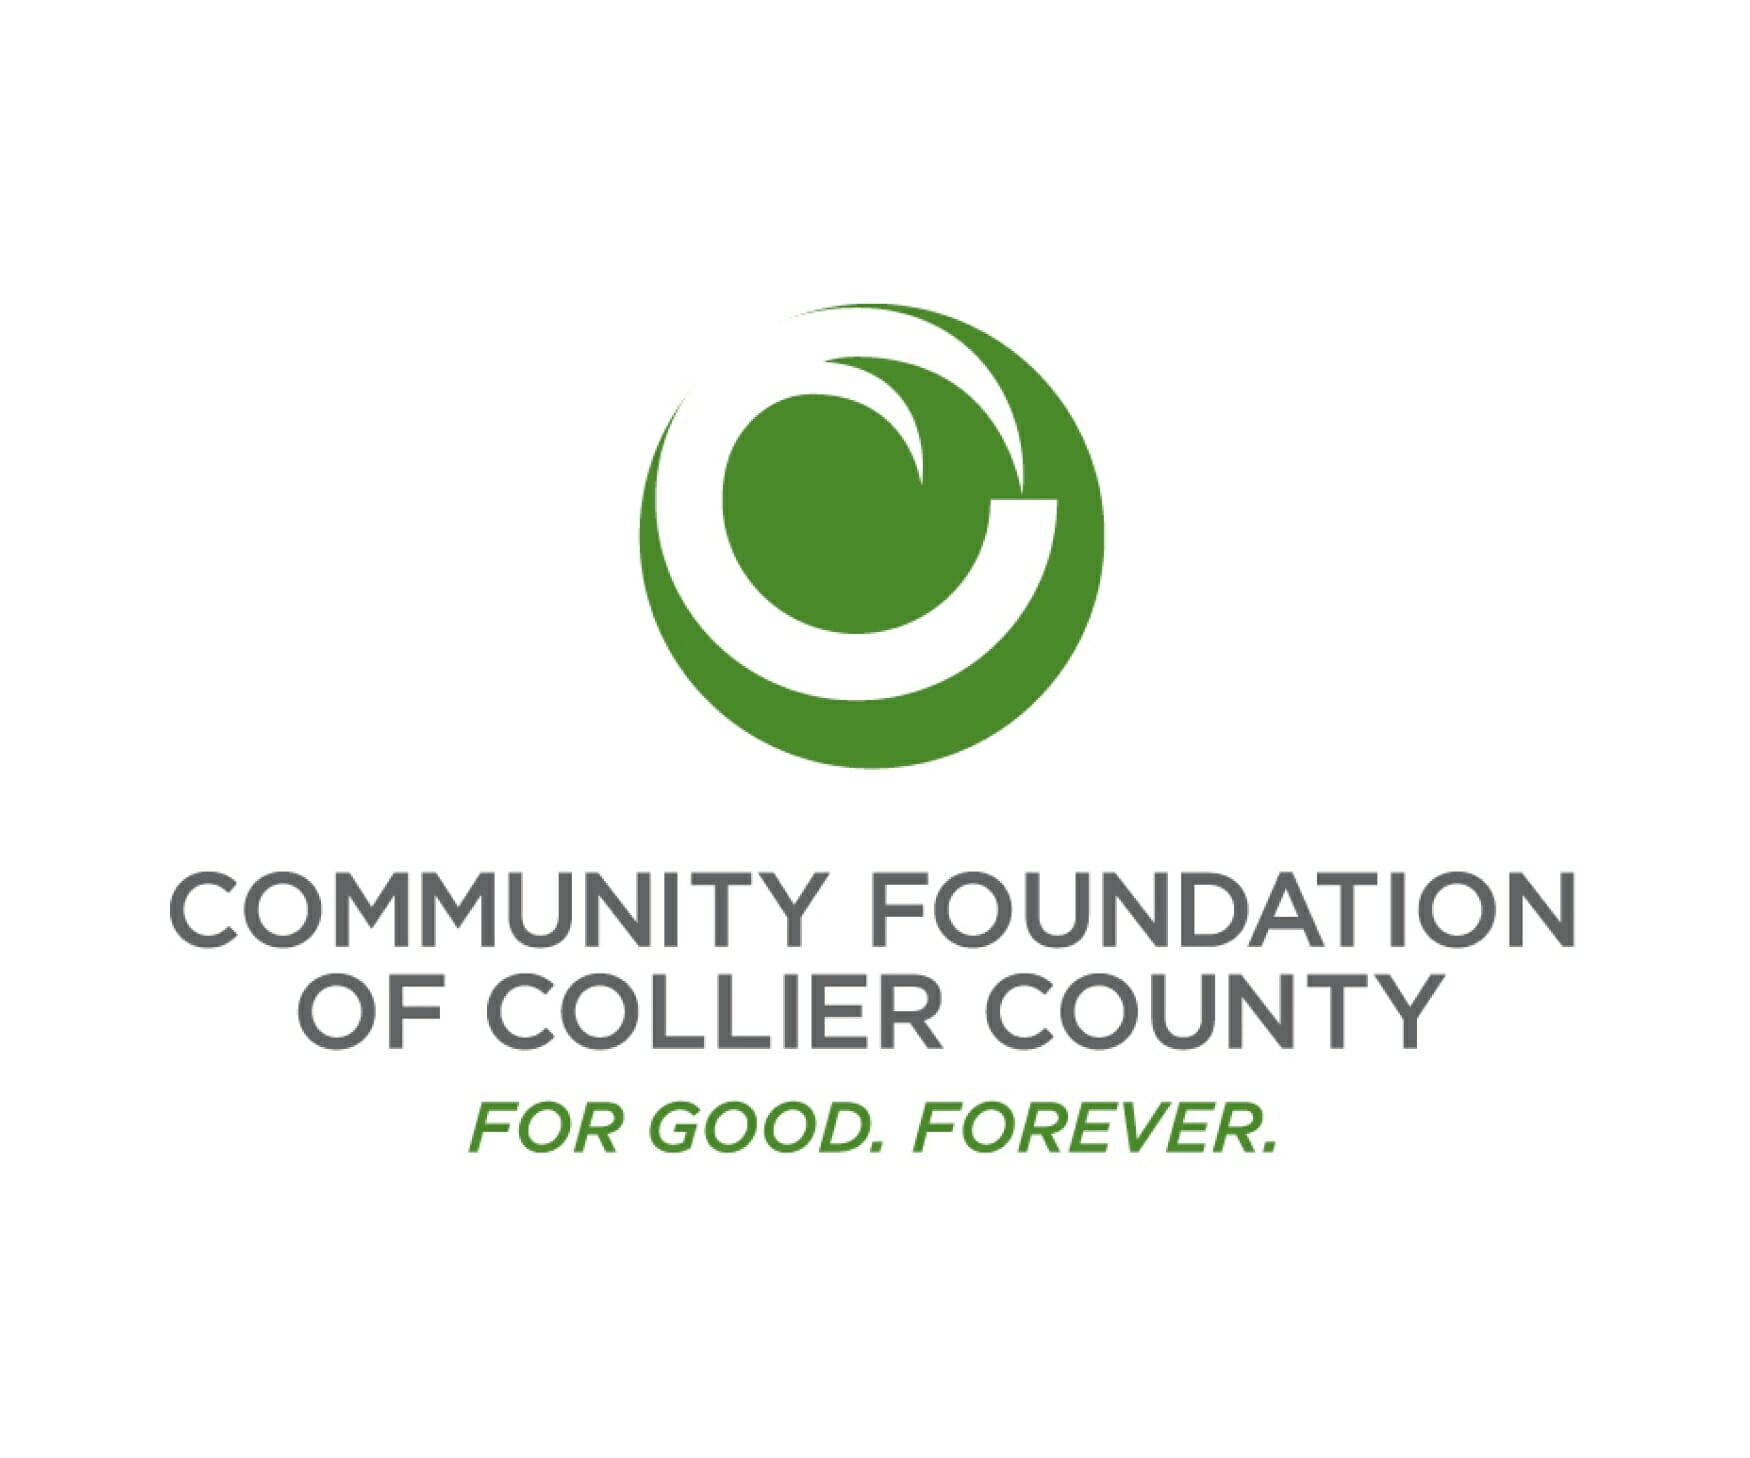 DLC Receives Communications and Crisis Response Grants from Community Foundation of Collier County Your Passion. Your Collier. Campaign